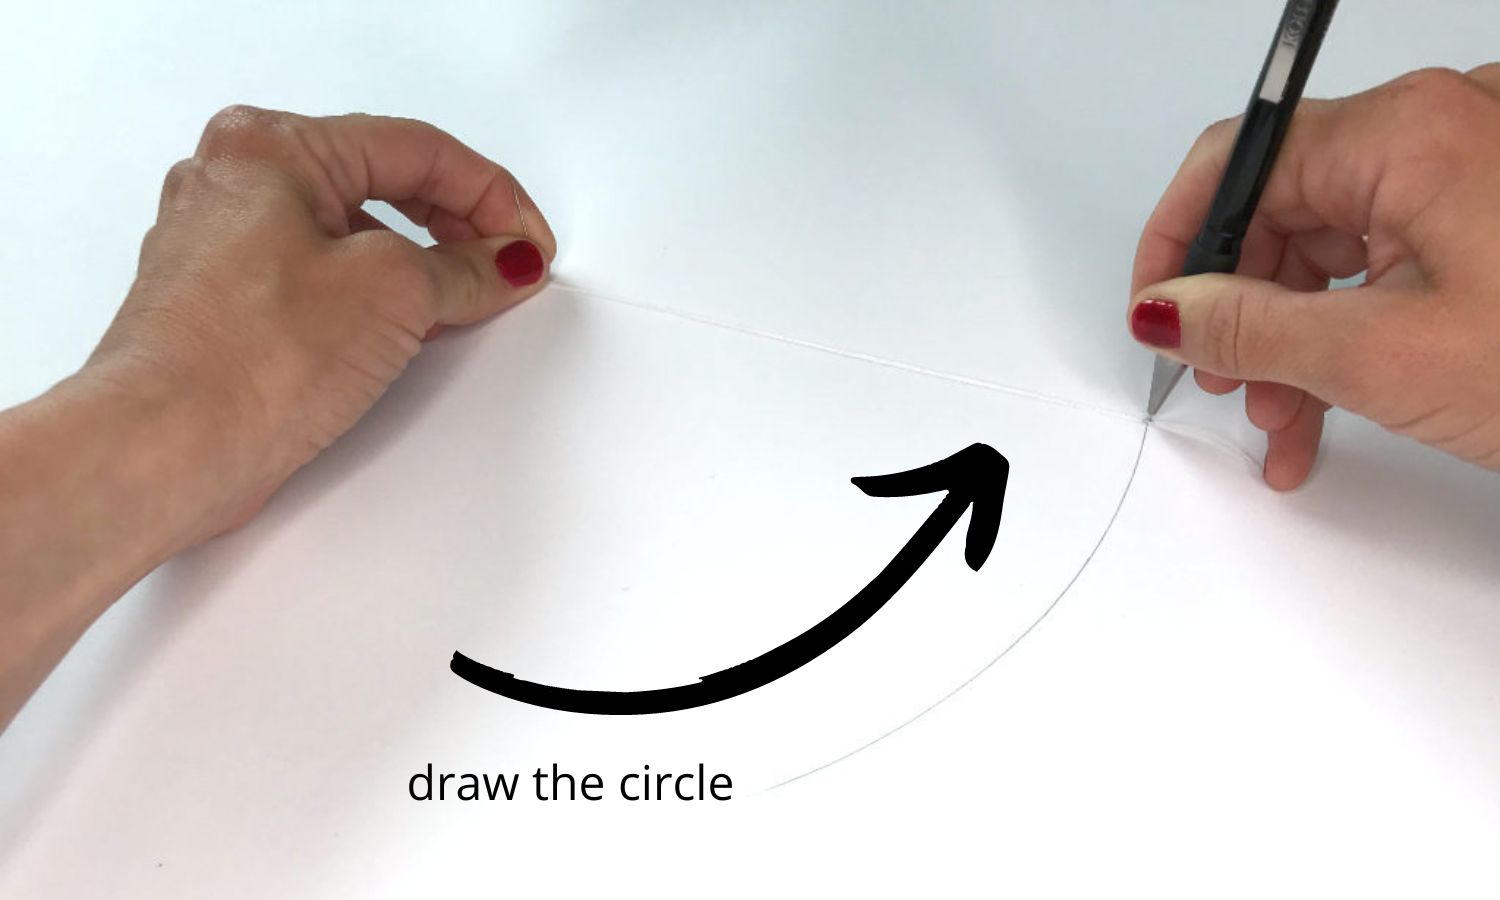 Step by step instructions how to draw a large circle without a pair of compasses.